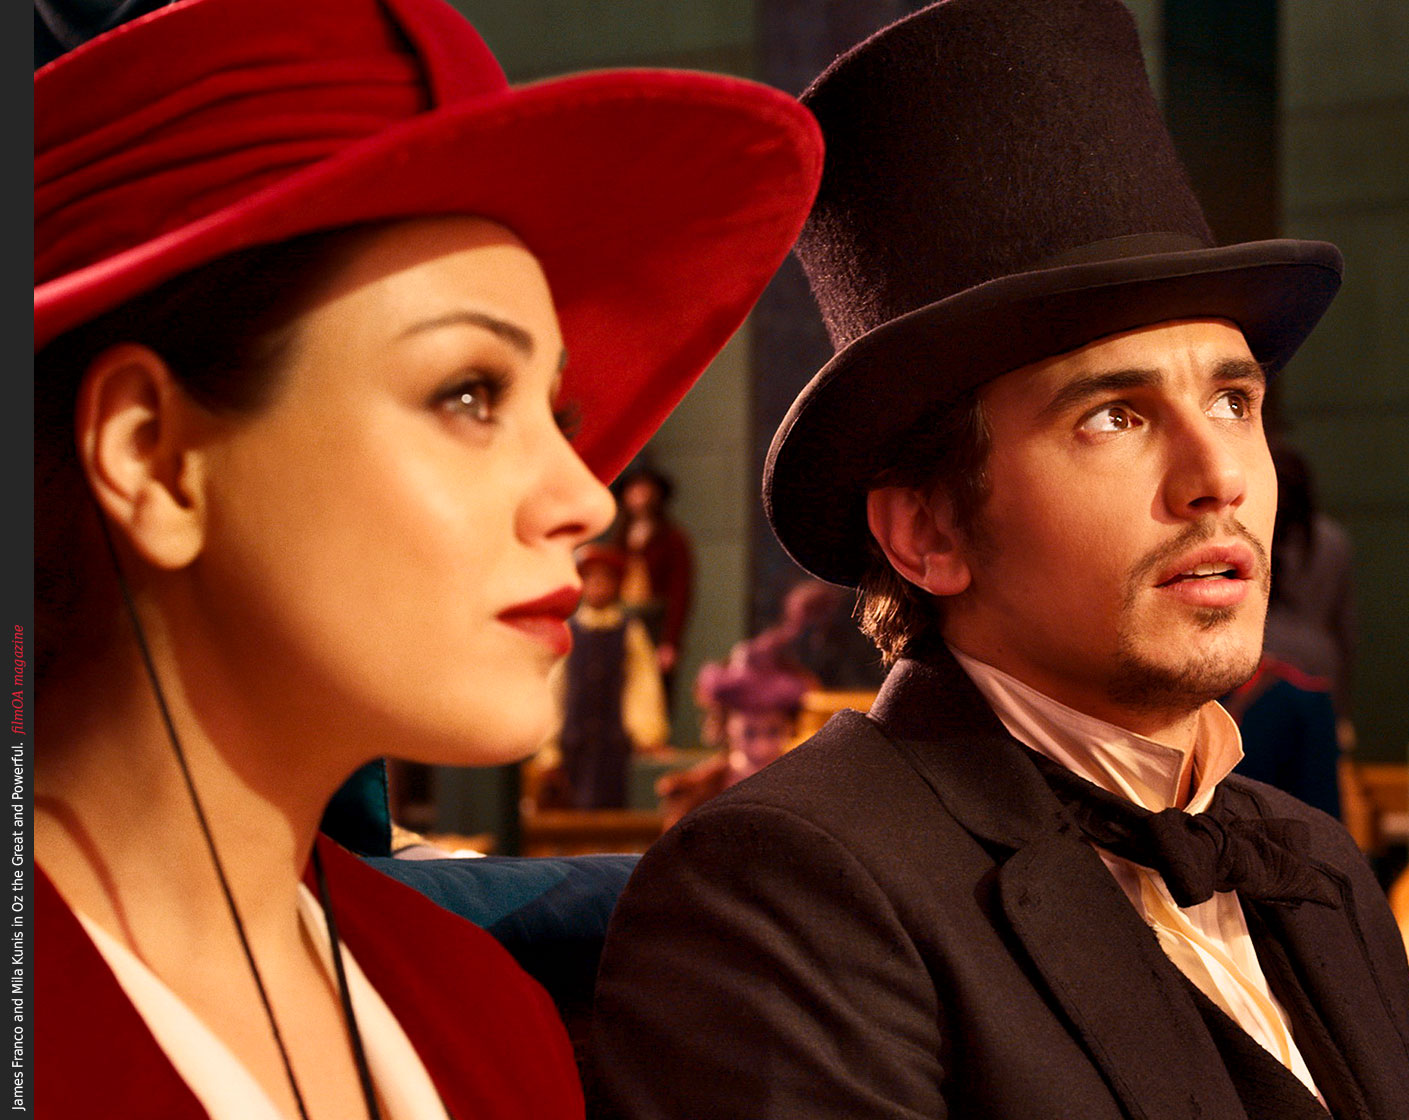 James Franco and Mila Kunis in Oz the Great and Powerful